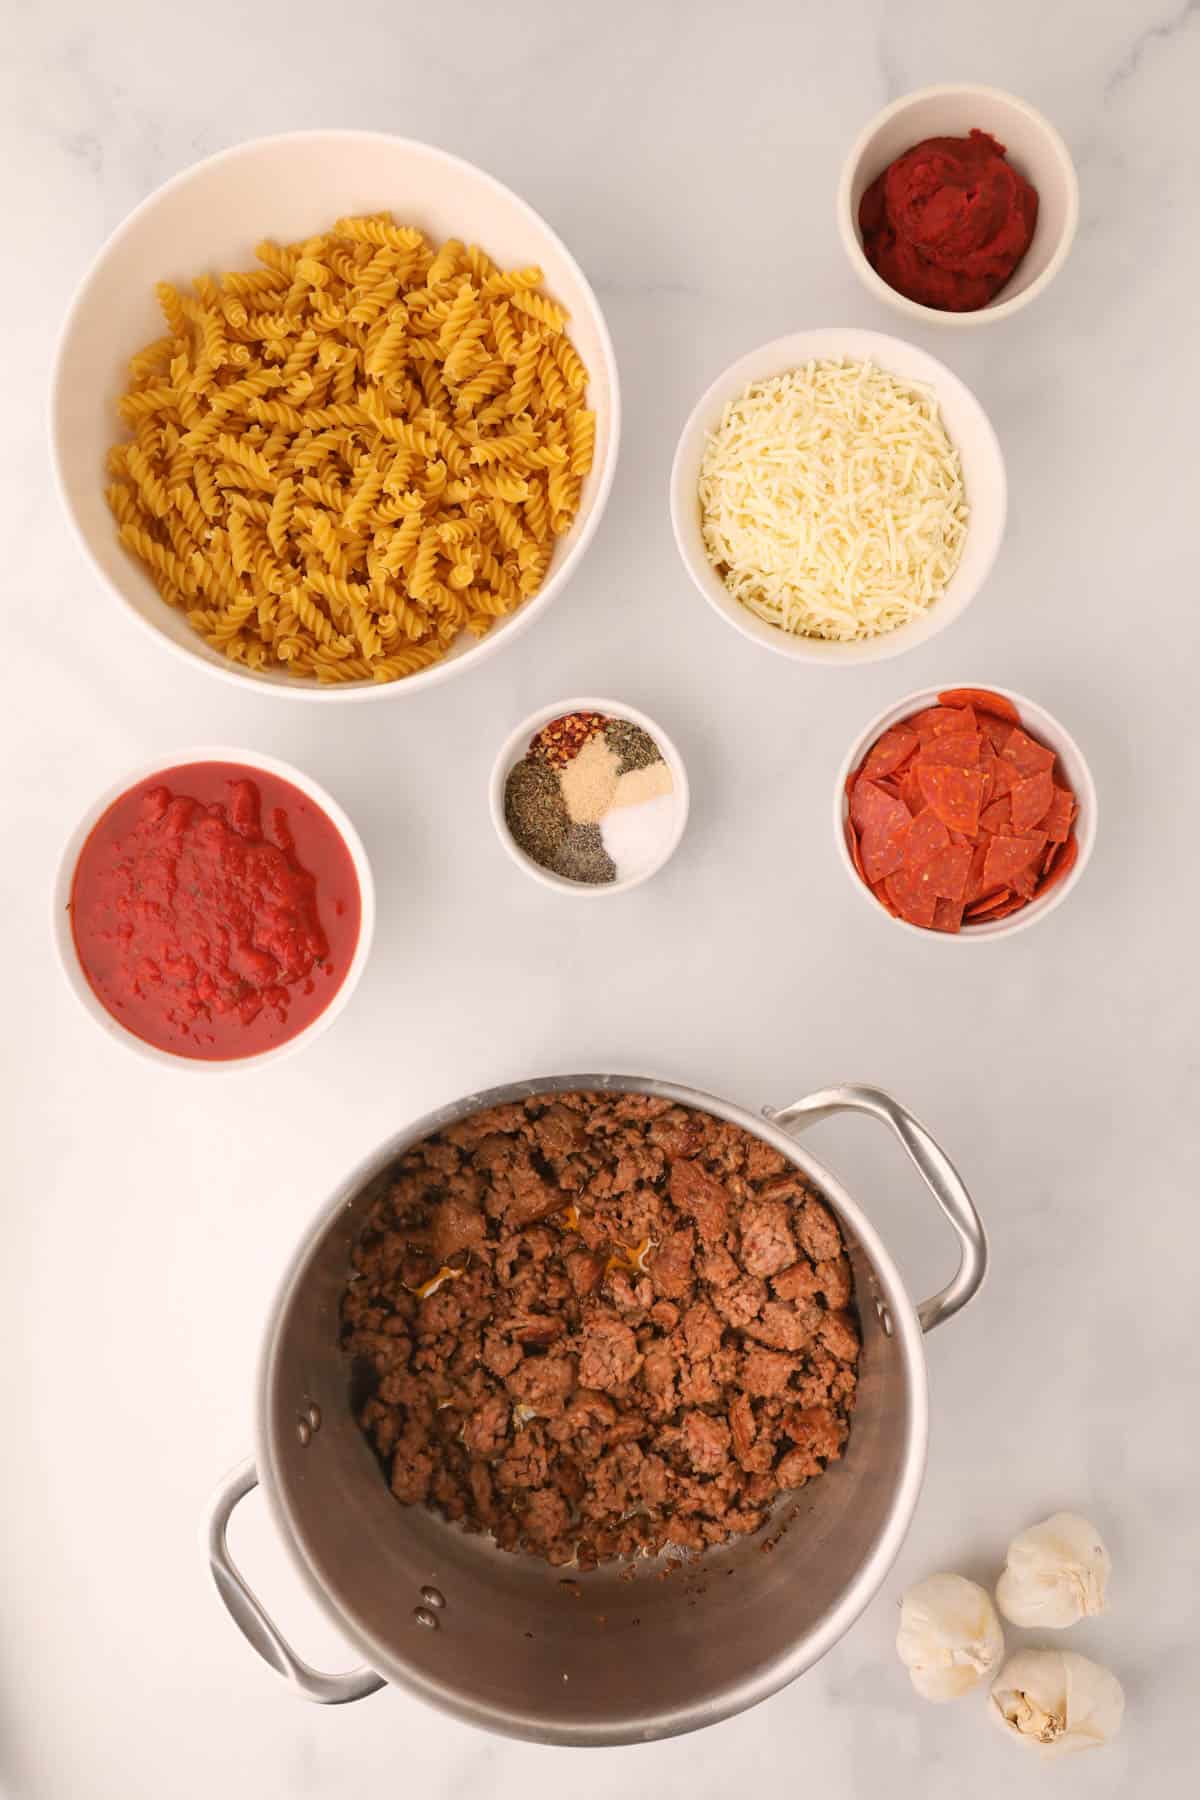 Cooked Italian sausage in a large pot next to the remaining ingredients for making pizza pasta.